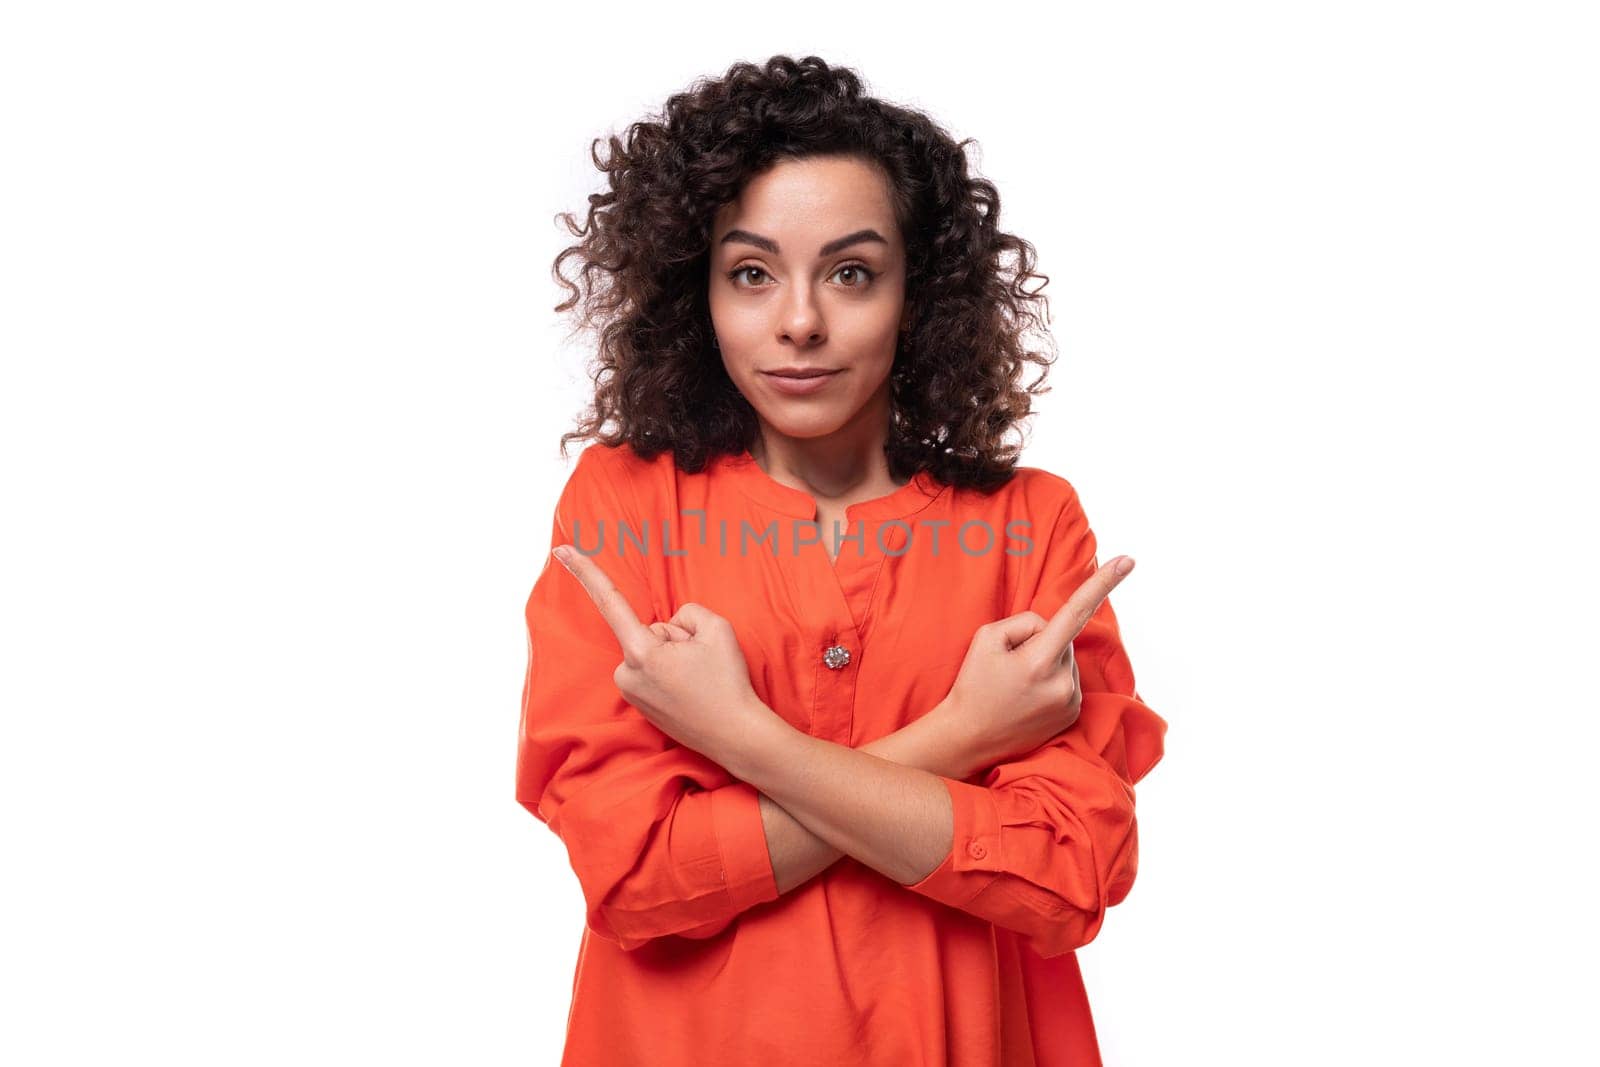 young successful caucasian business woman with curly hairstyle dressed in orange shirt by TRMK